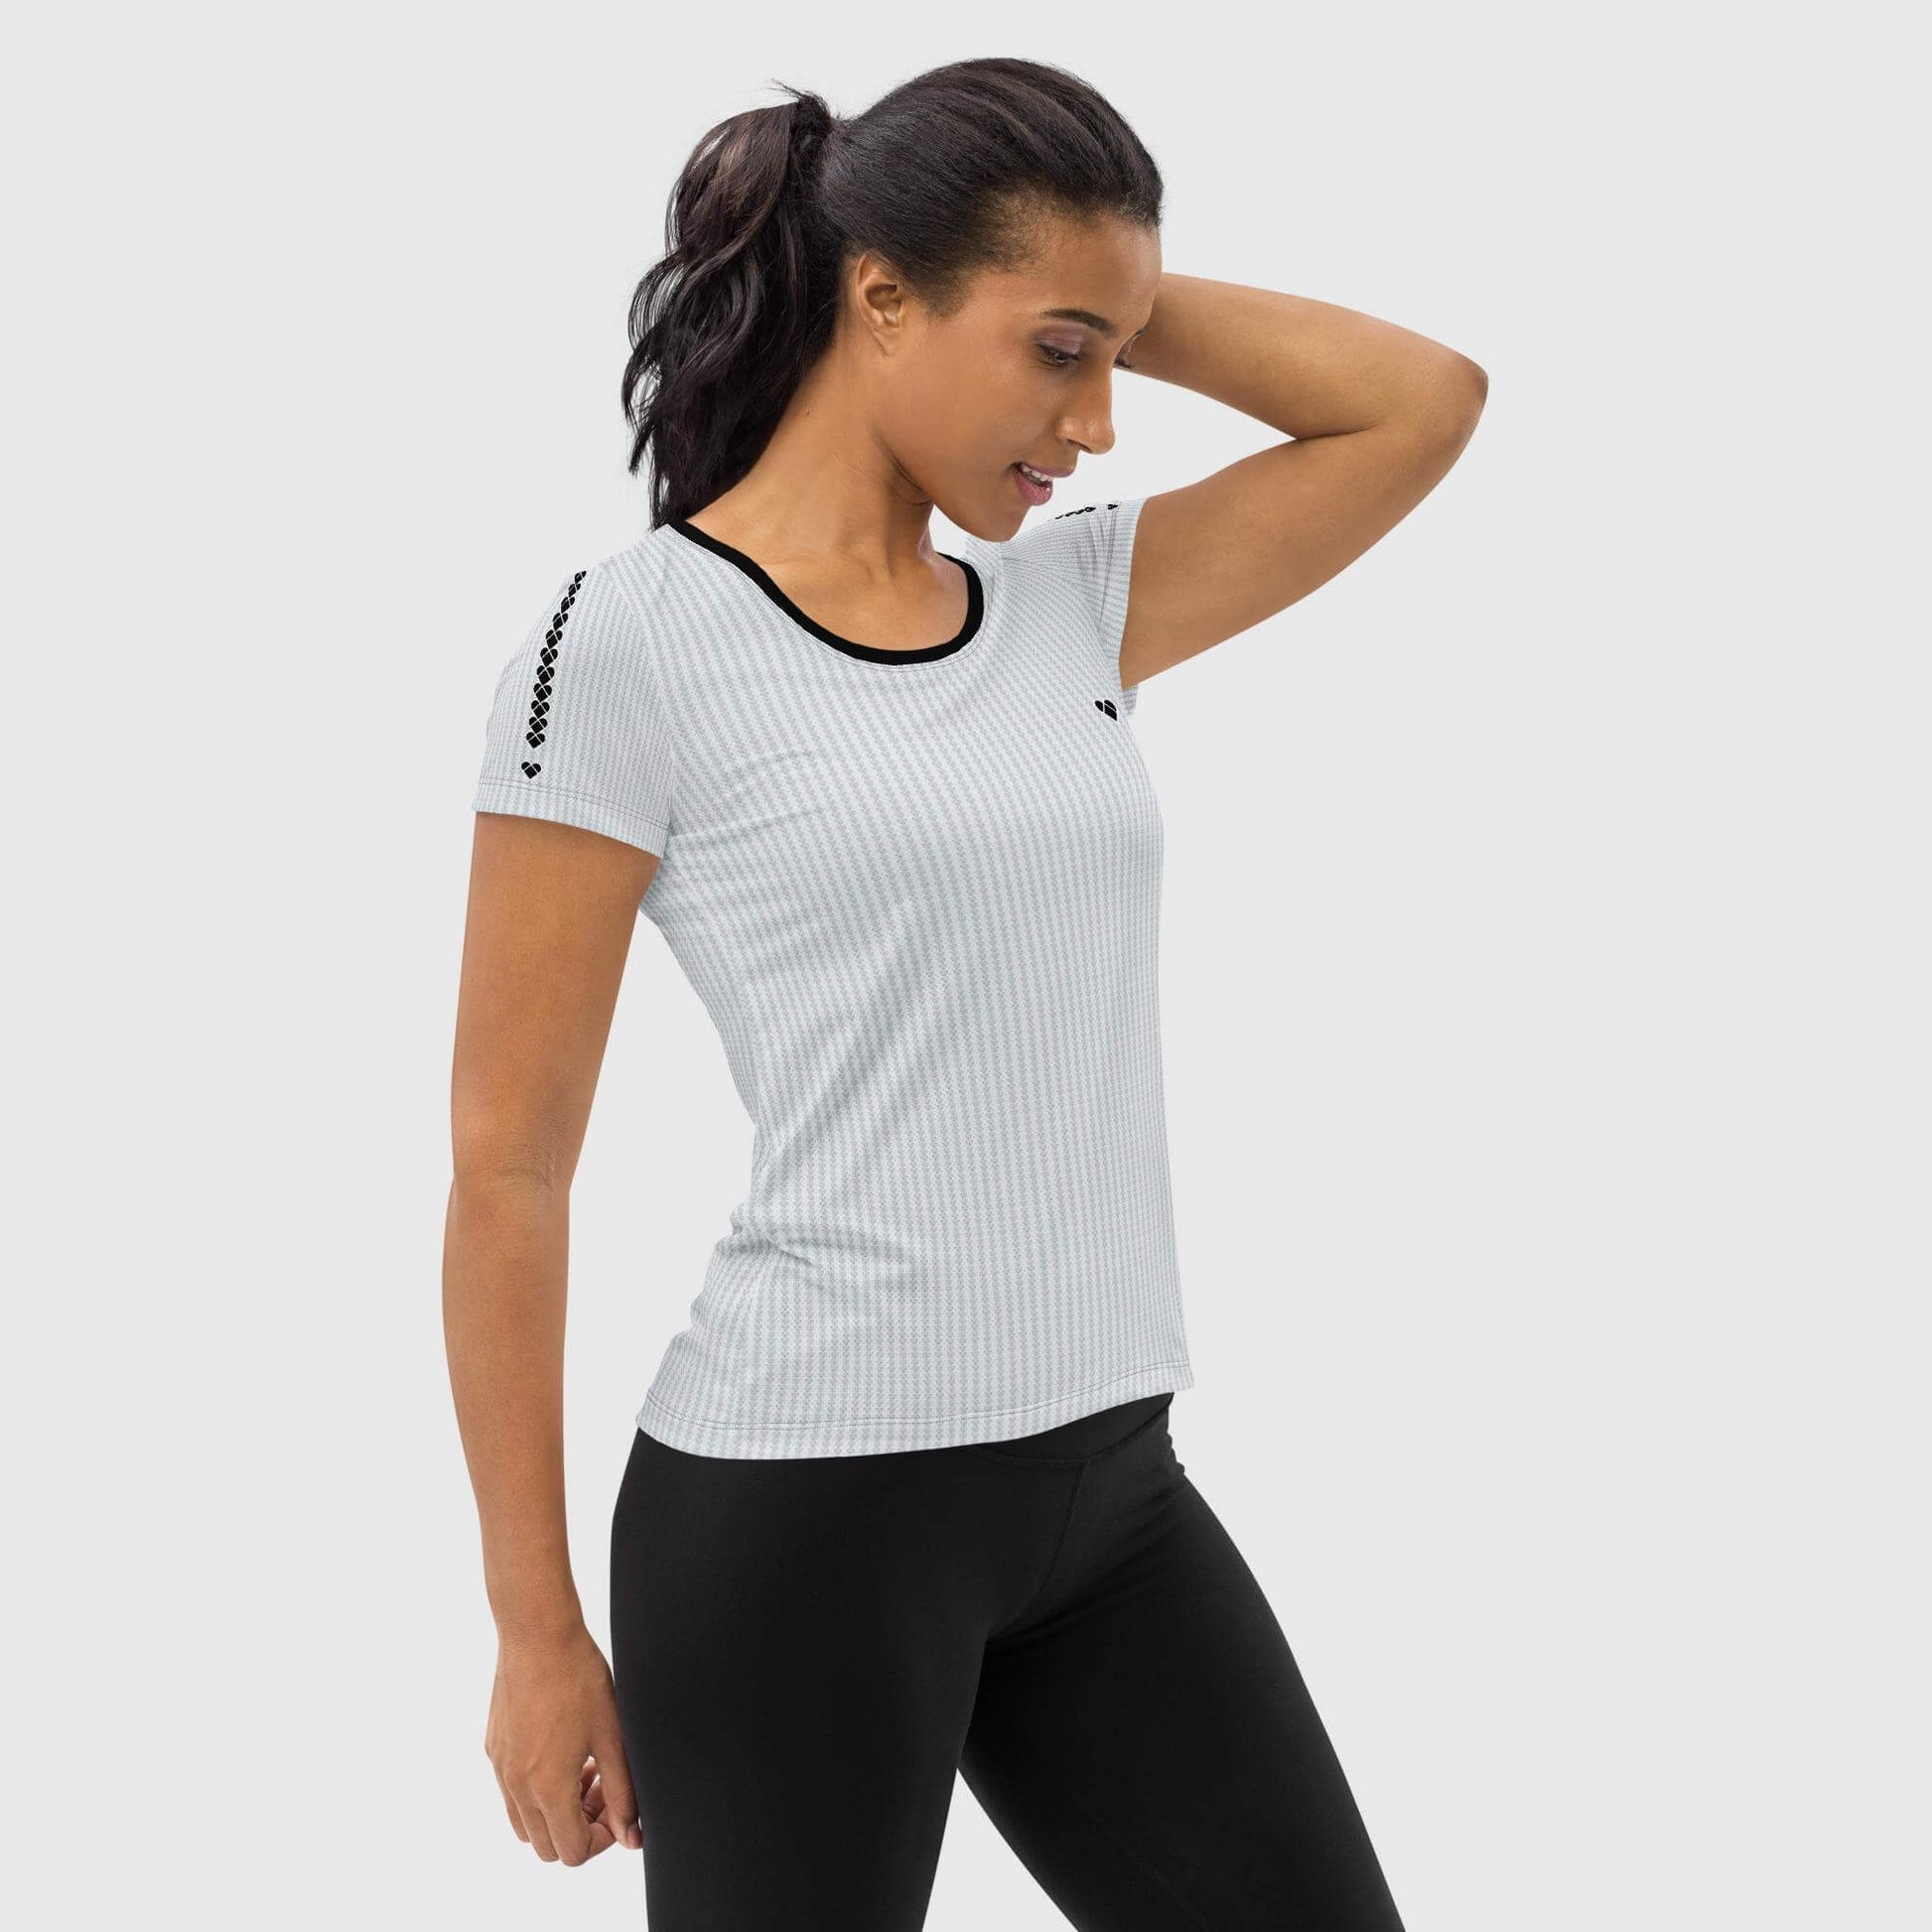 girl model wearing Light gray gym shirt with black heart and logo stripe on sleeves side view